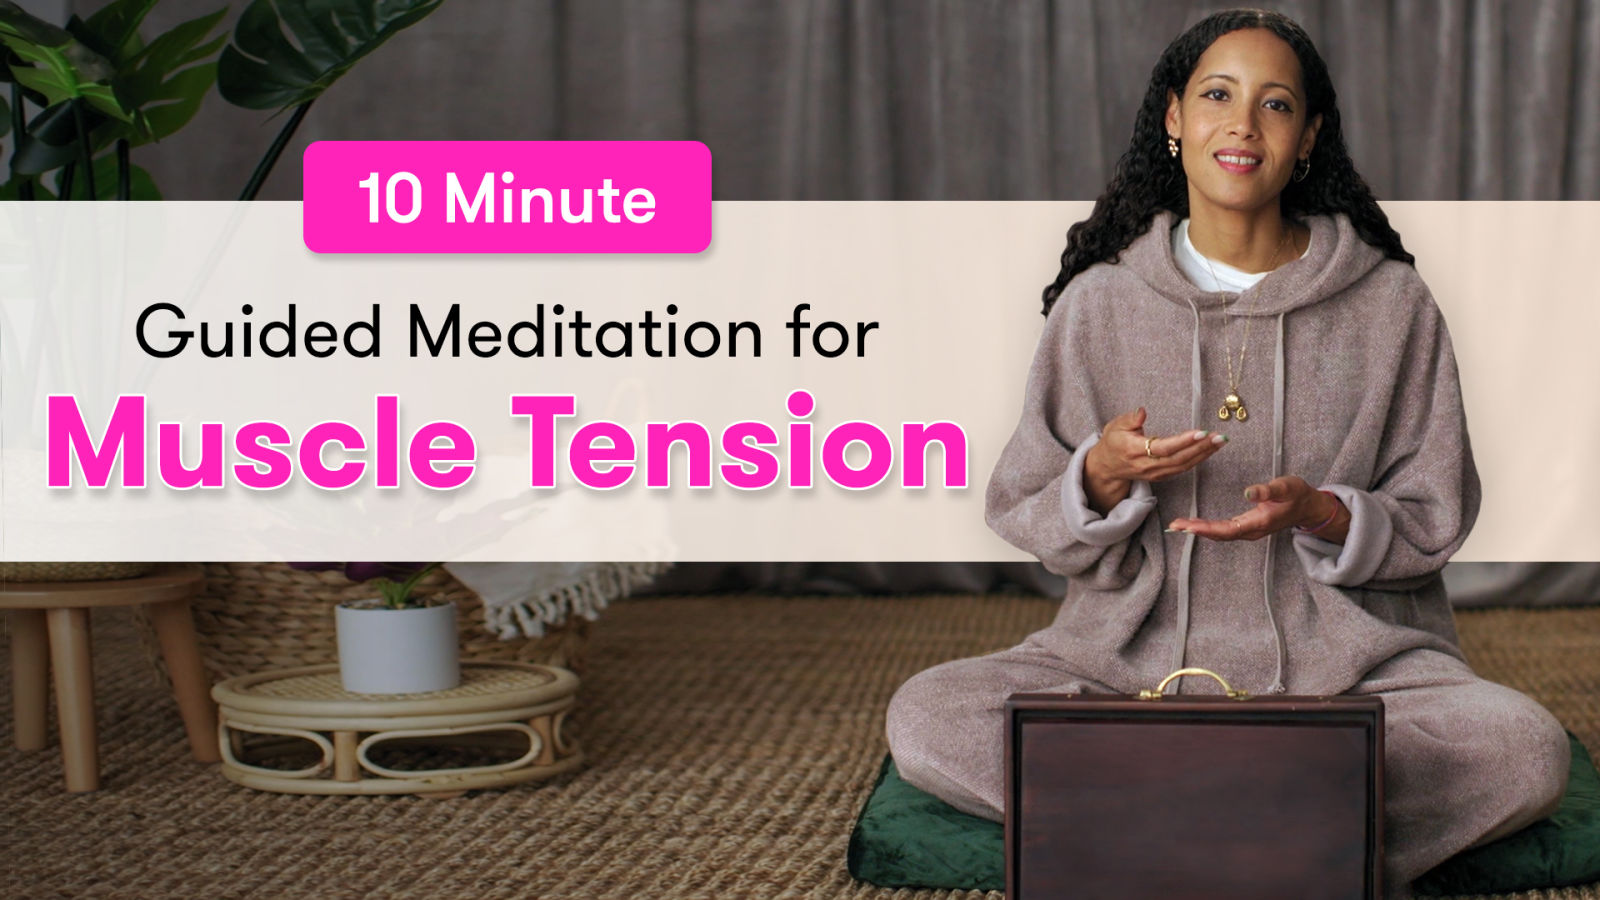 10 Minutes Of Guided Meditation For Muscle Tension